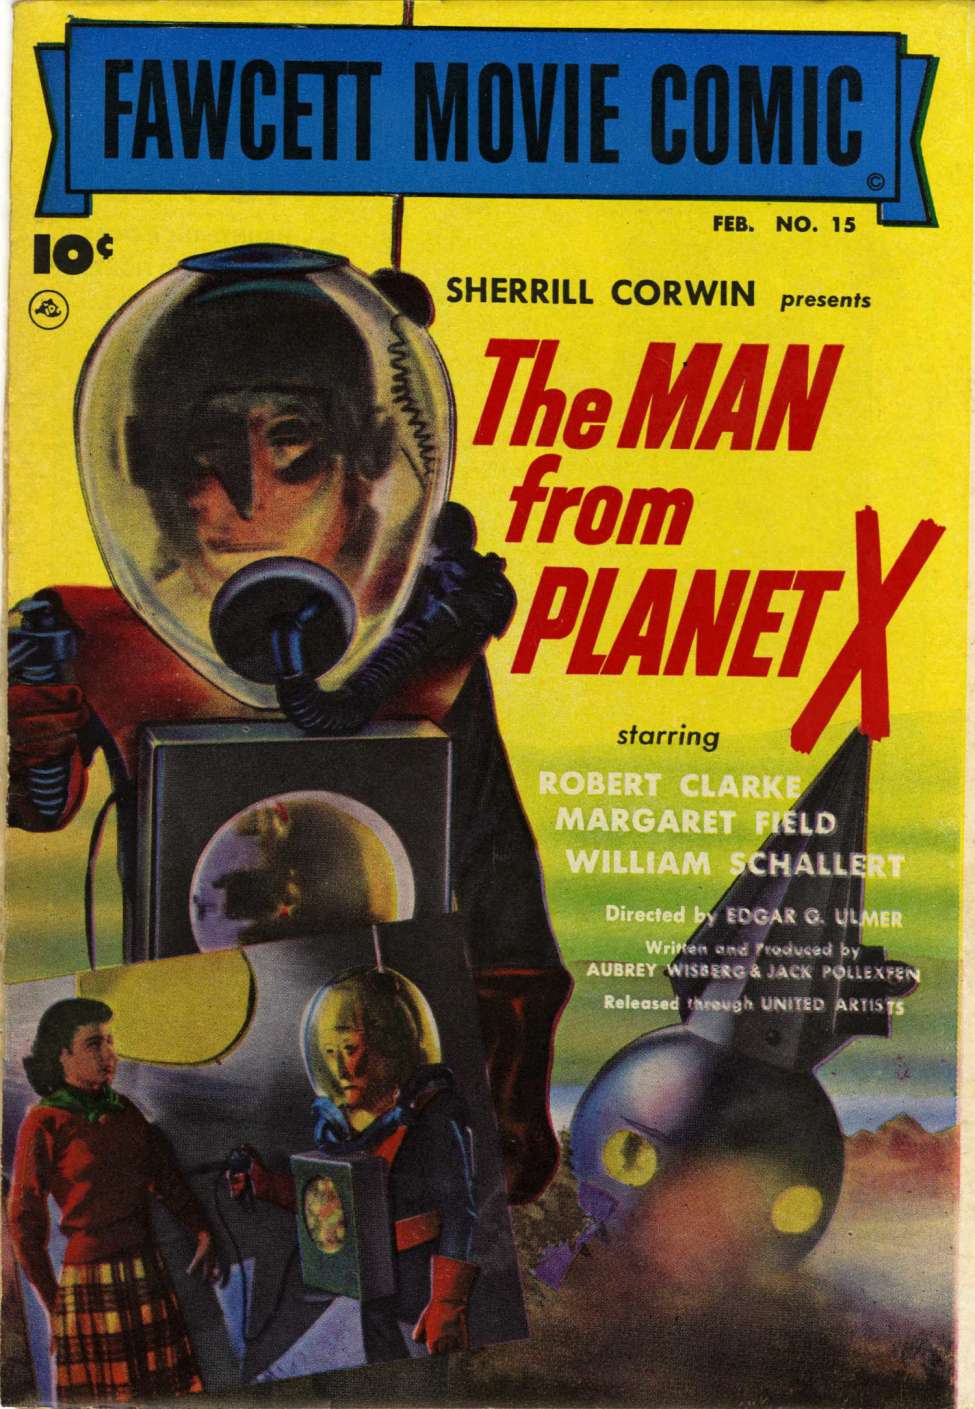 Book Cover For Fawcett Movie Comic 15 - The Man from Planet X